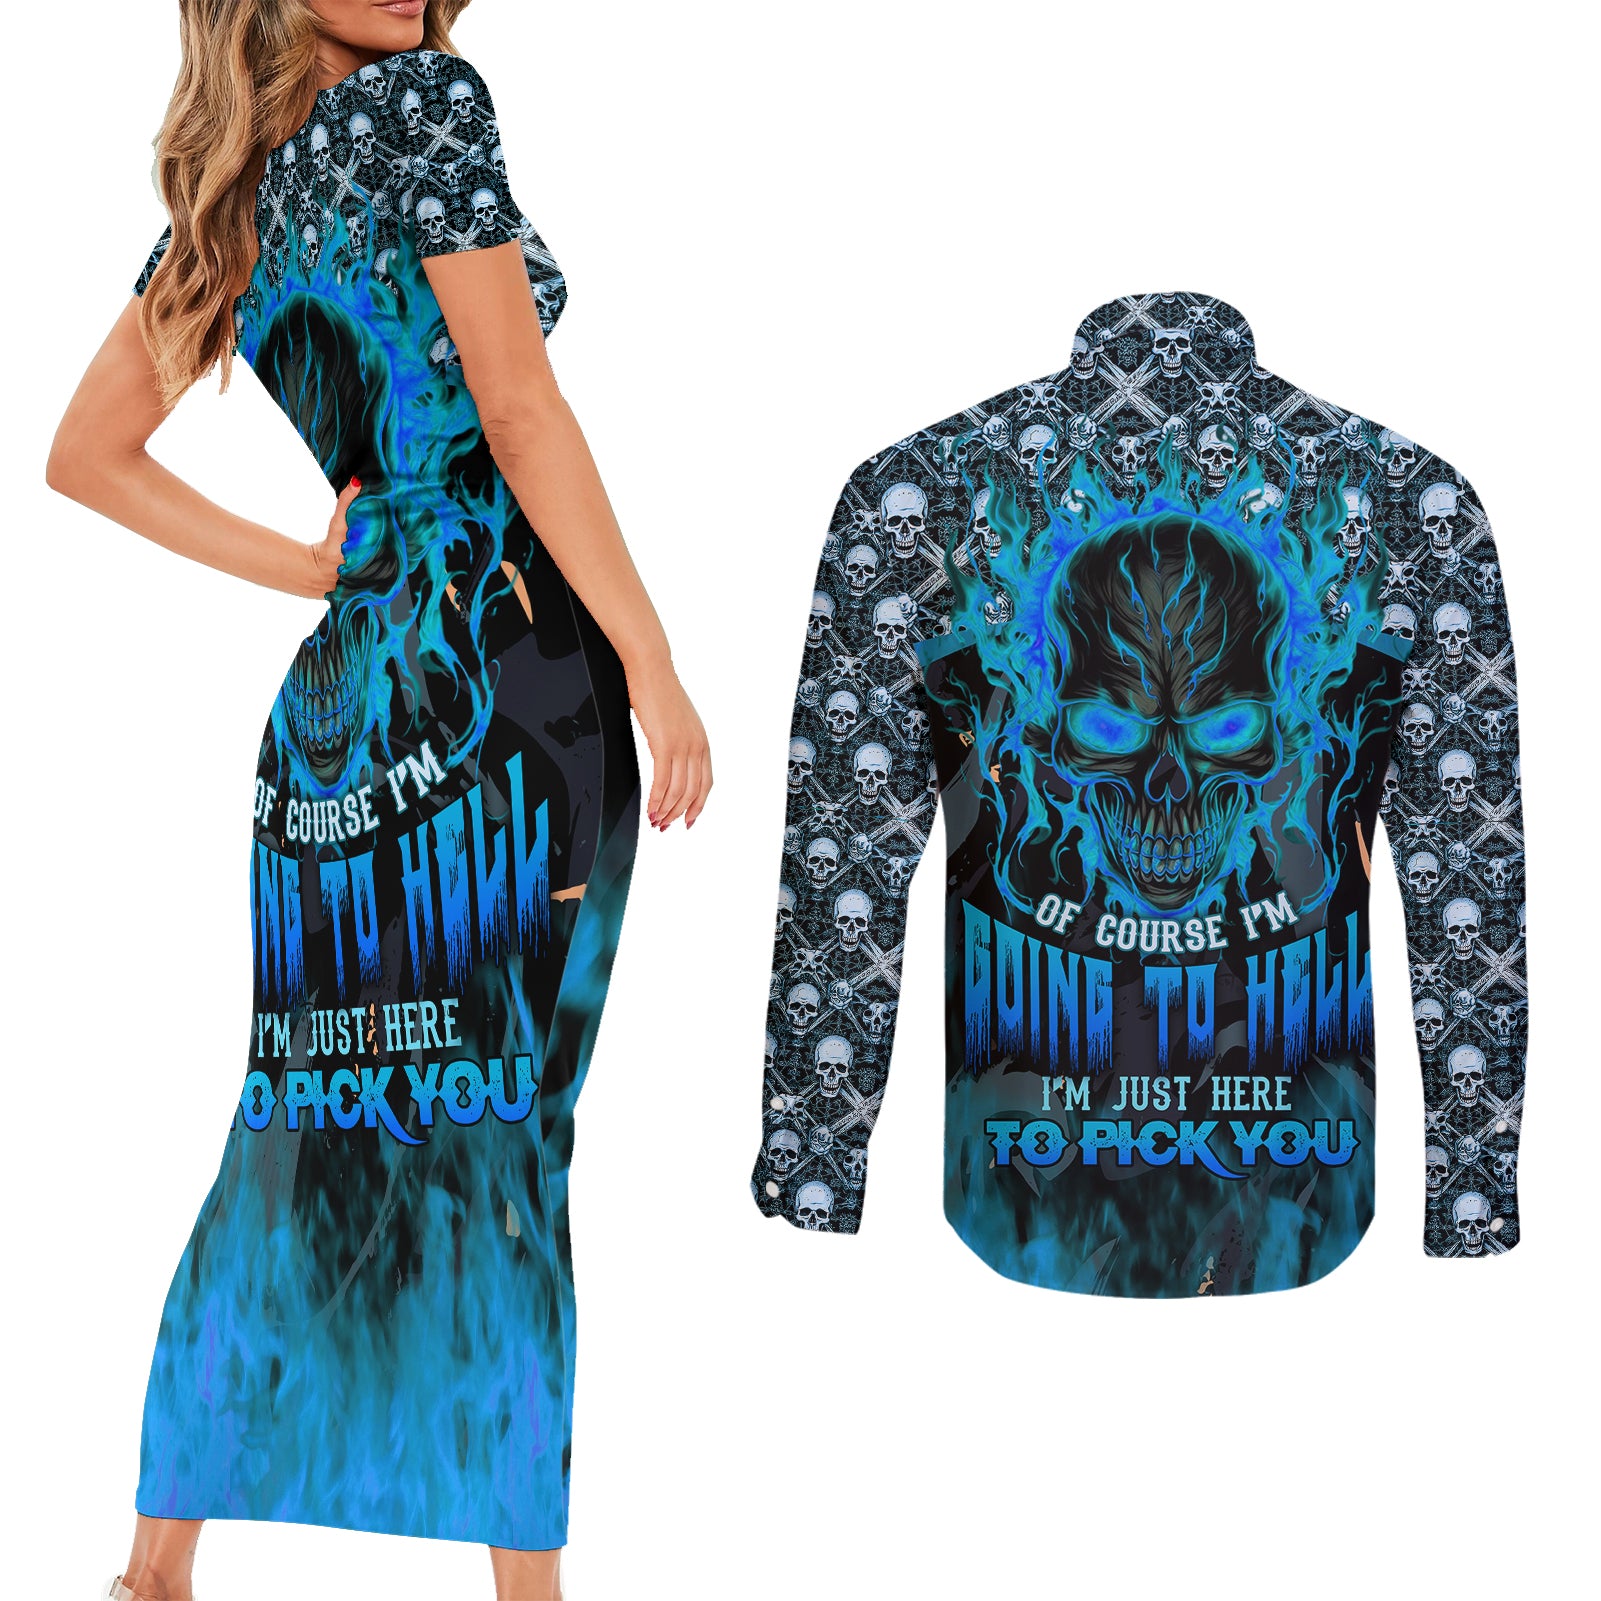 fire-skull-couples-matching-short-sleeve-bodycon-dress-and-long-sleeve-button-shirts-of-course-im-going-to-hell-im-just-here-to-pick-you-up